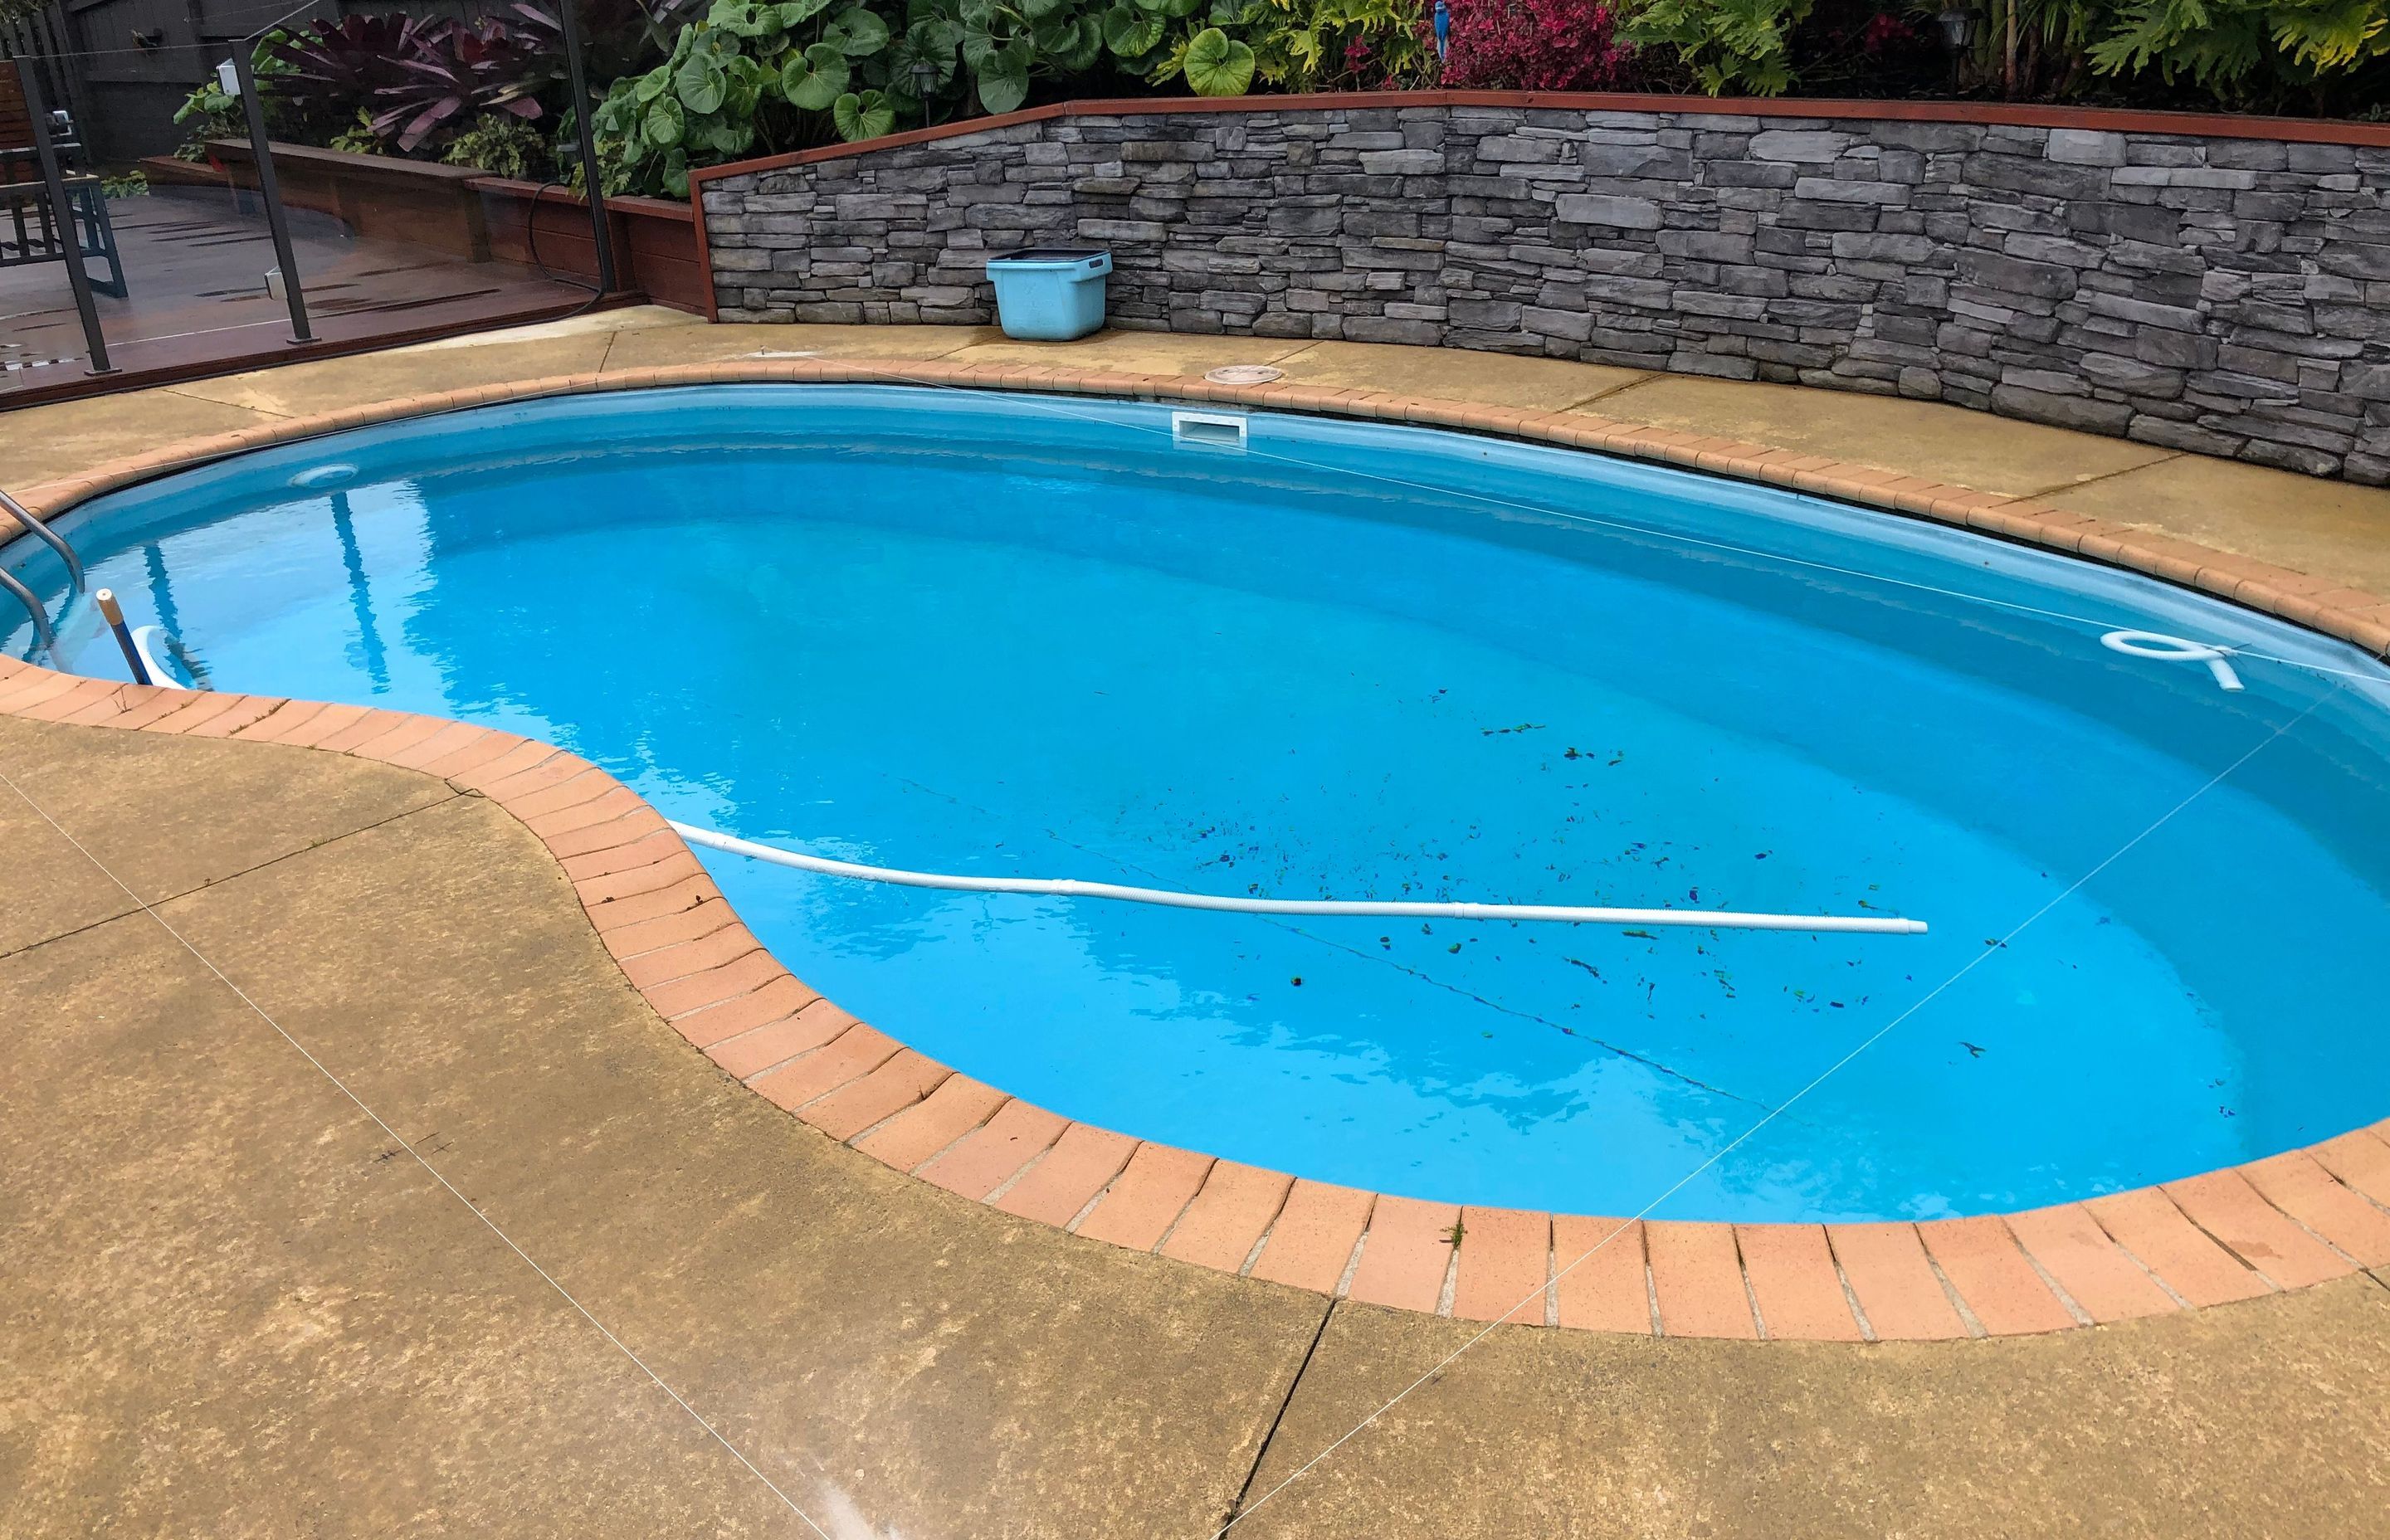 St Johns Pool - Before Renovation an existing kidney shaped pool with a problematic / leaky vinyl liner